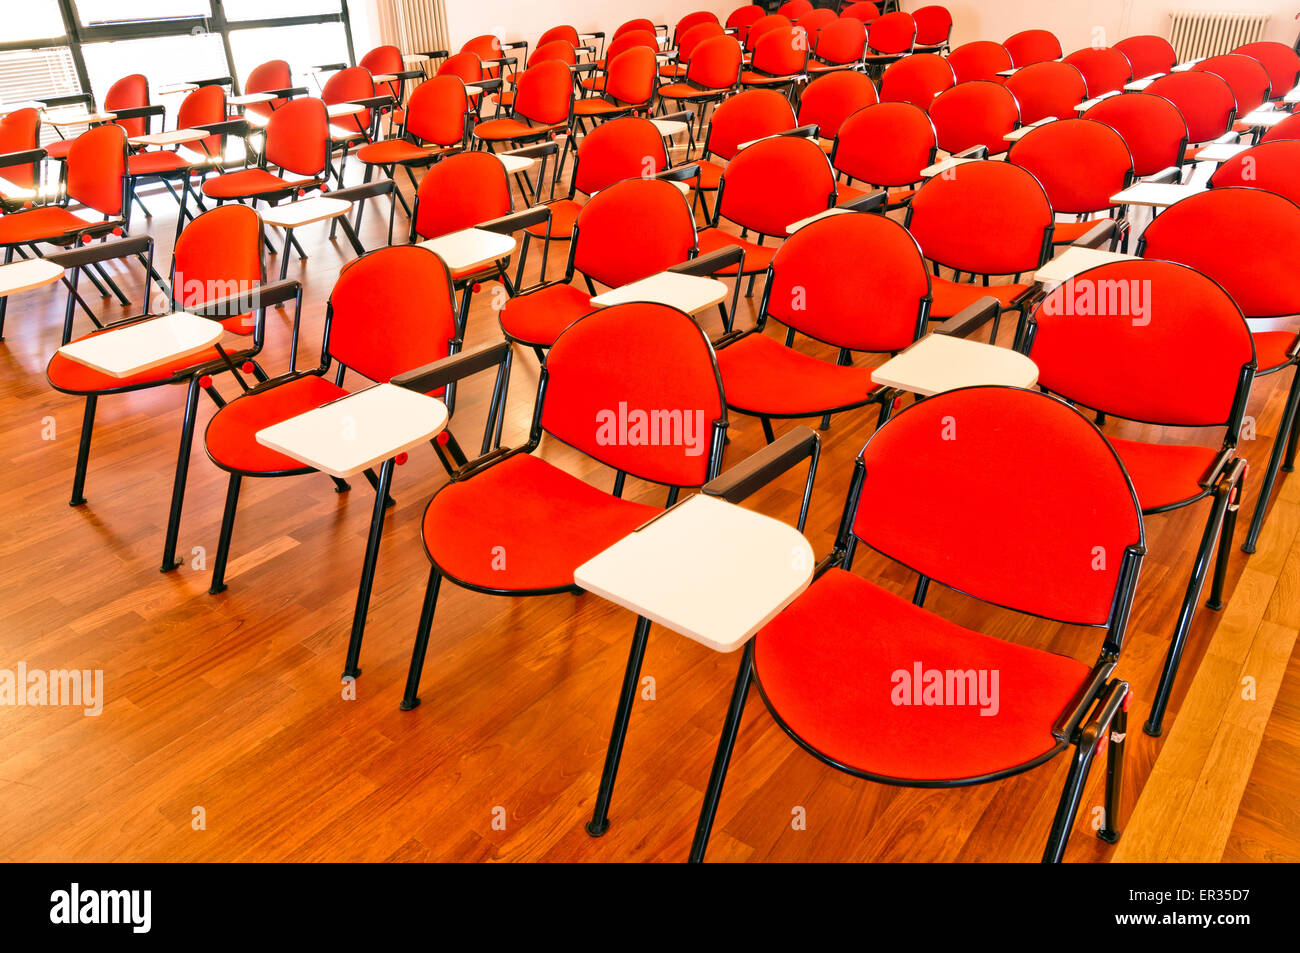 Exam Room Chairs Stock Photos Exam Room Chairs Stock Images Alamy